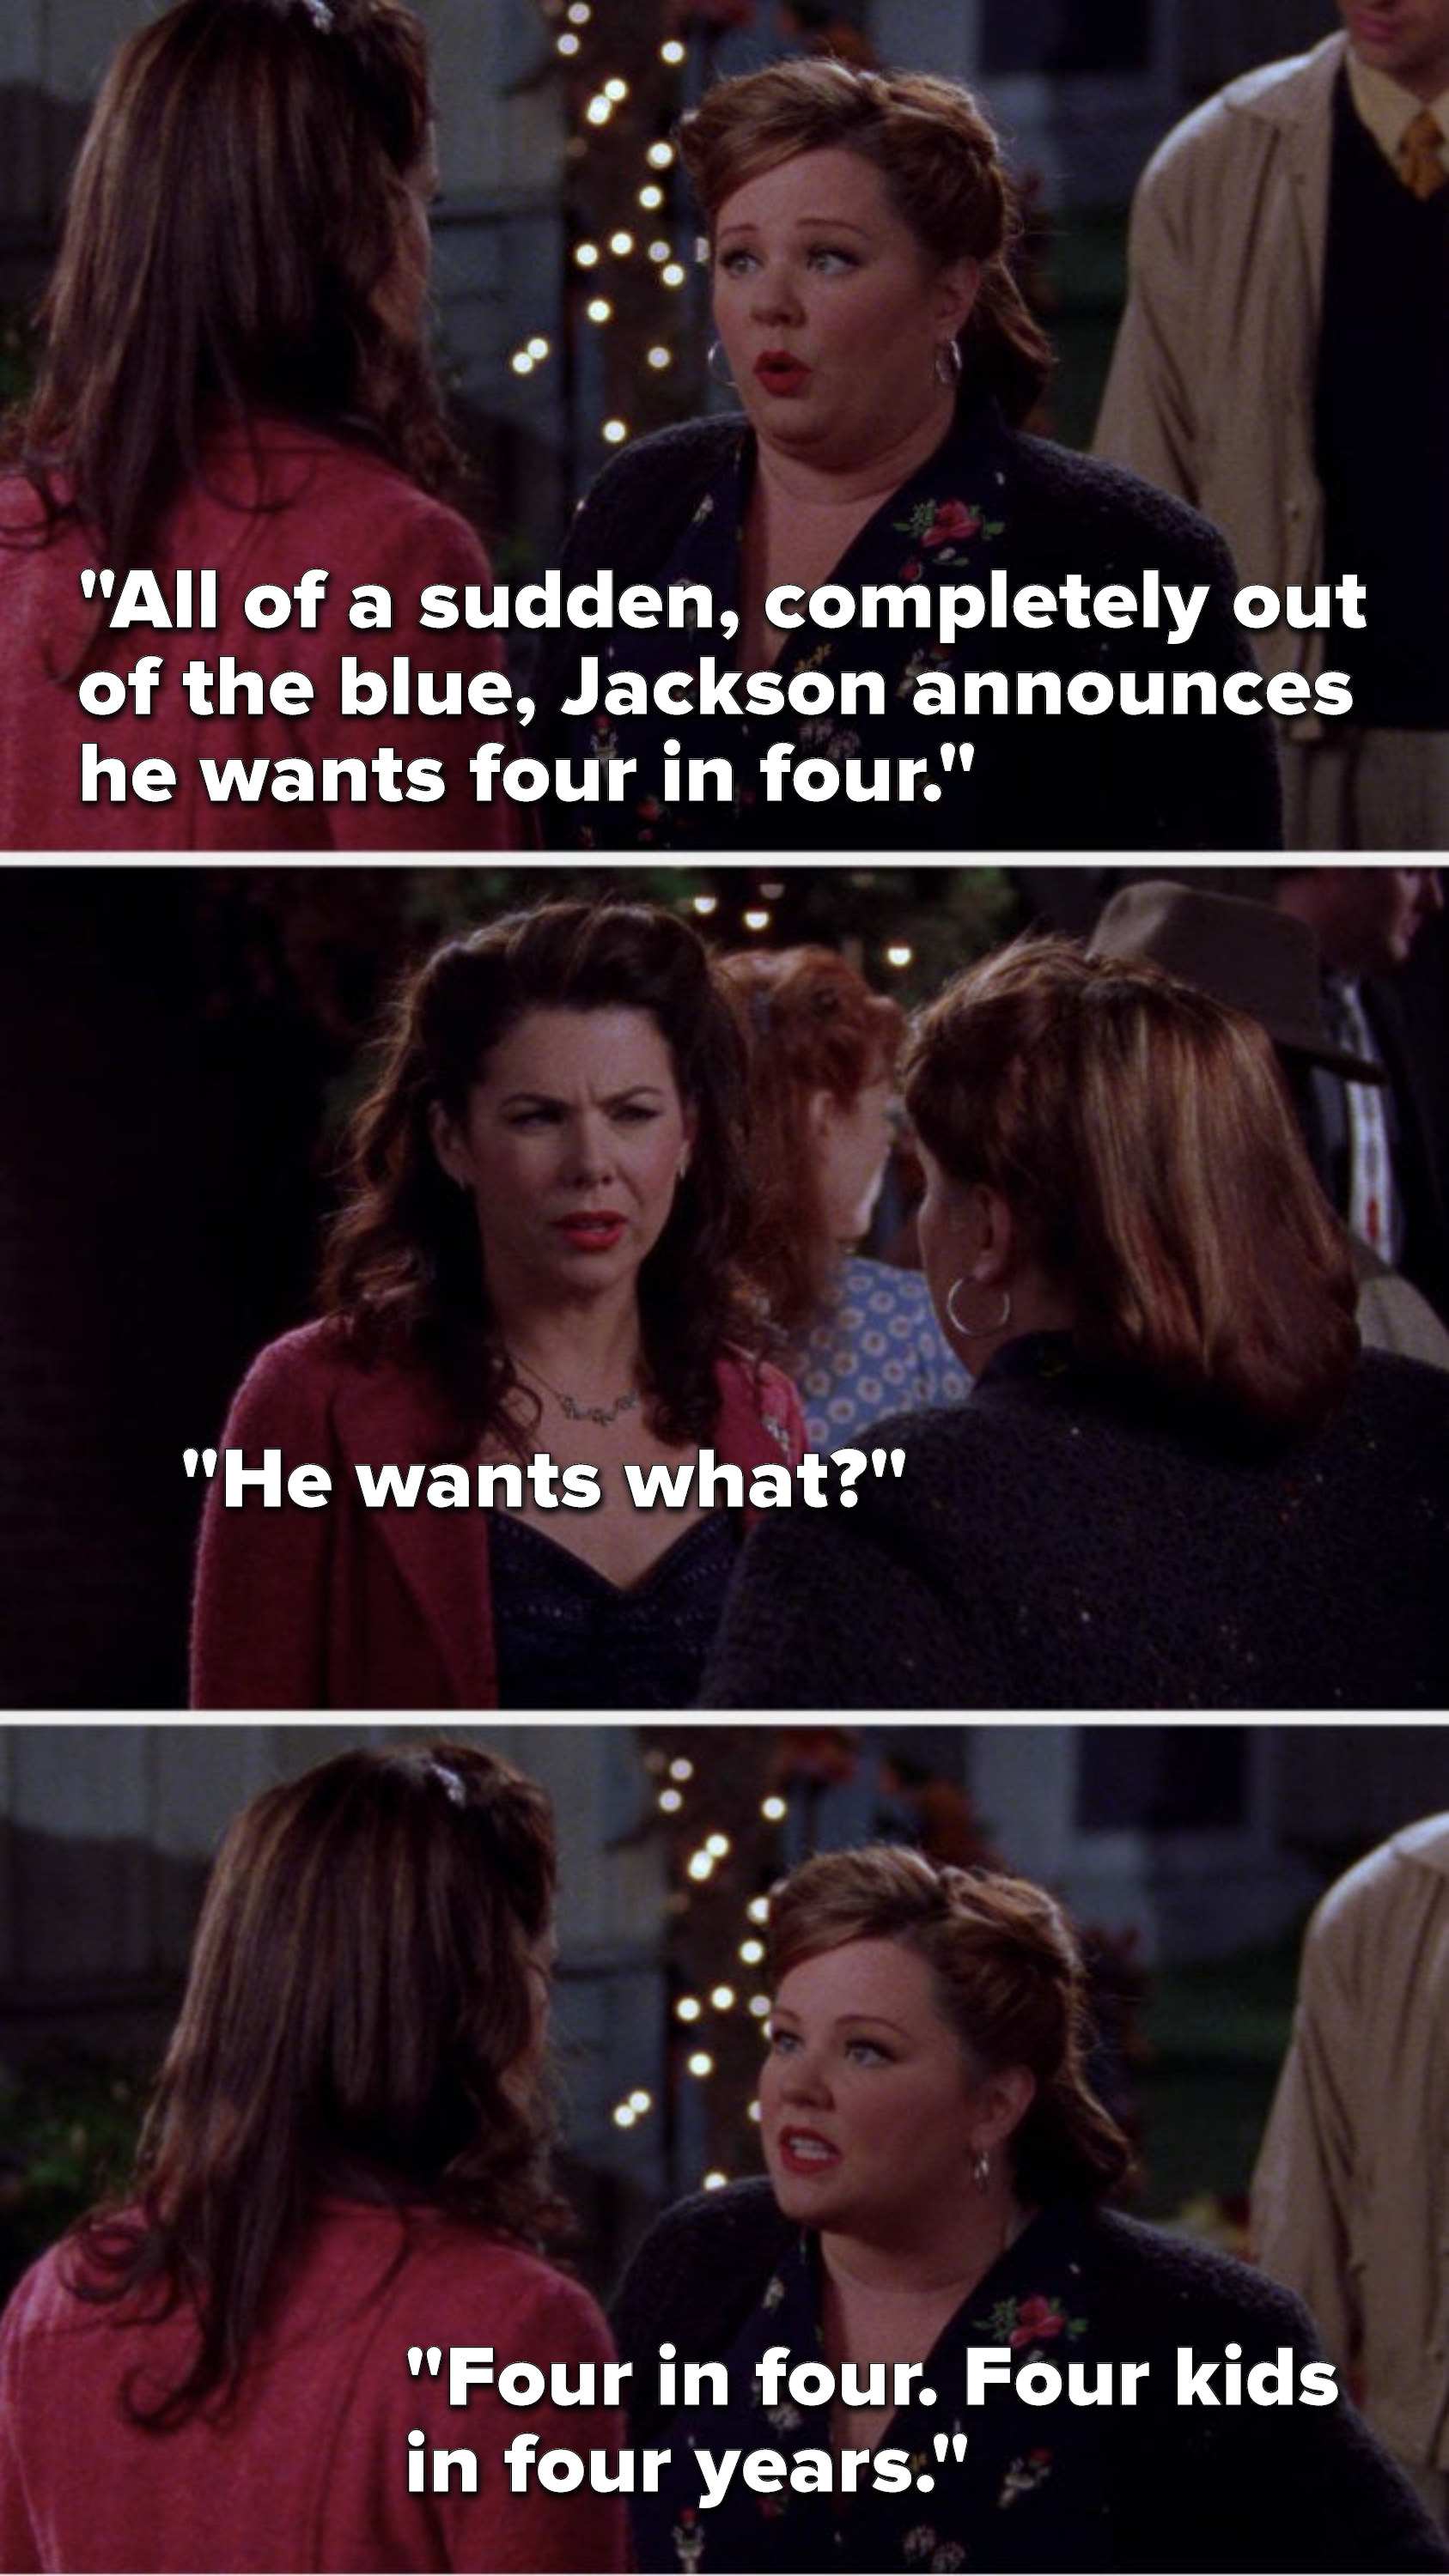 Sookie says, &quot;All of a sudden, completely out of the blue, Jackson announces he wants four in four,&quot; Lorelai says, &quot;He wants what,&quot; and Sookie says, &quot;Four in four, four kids in four years&quot;